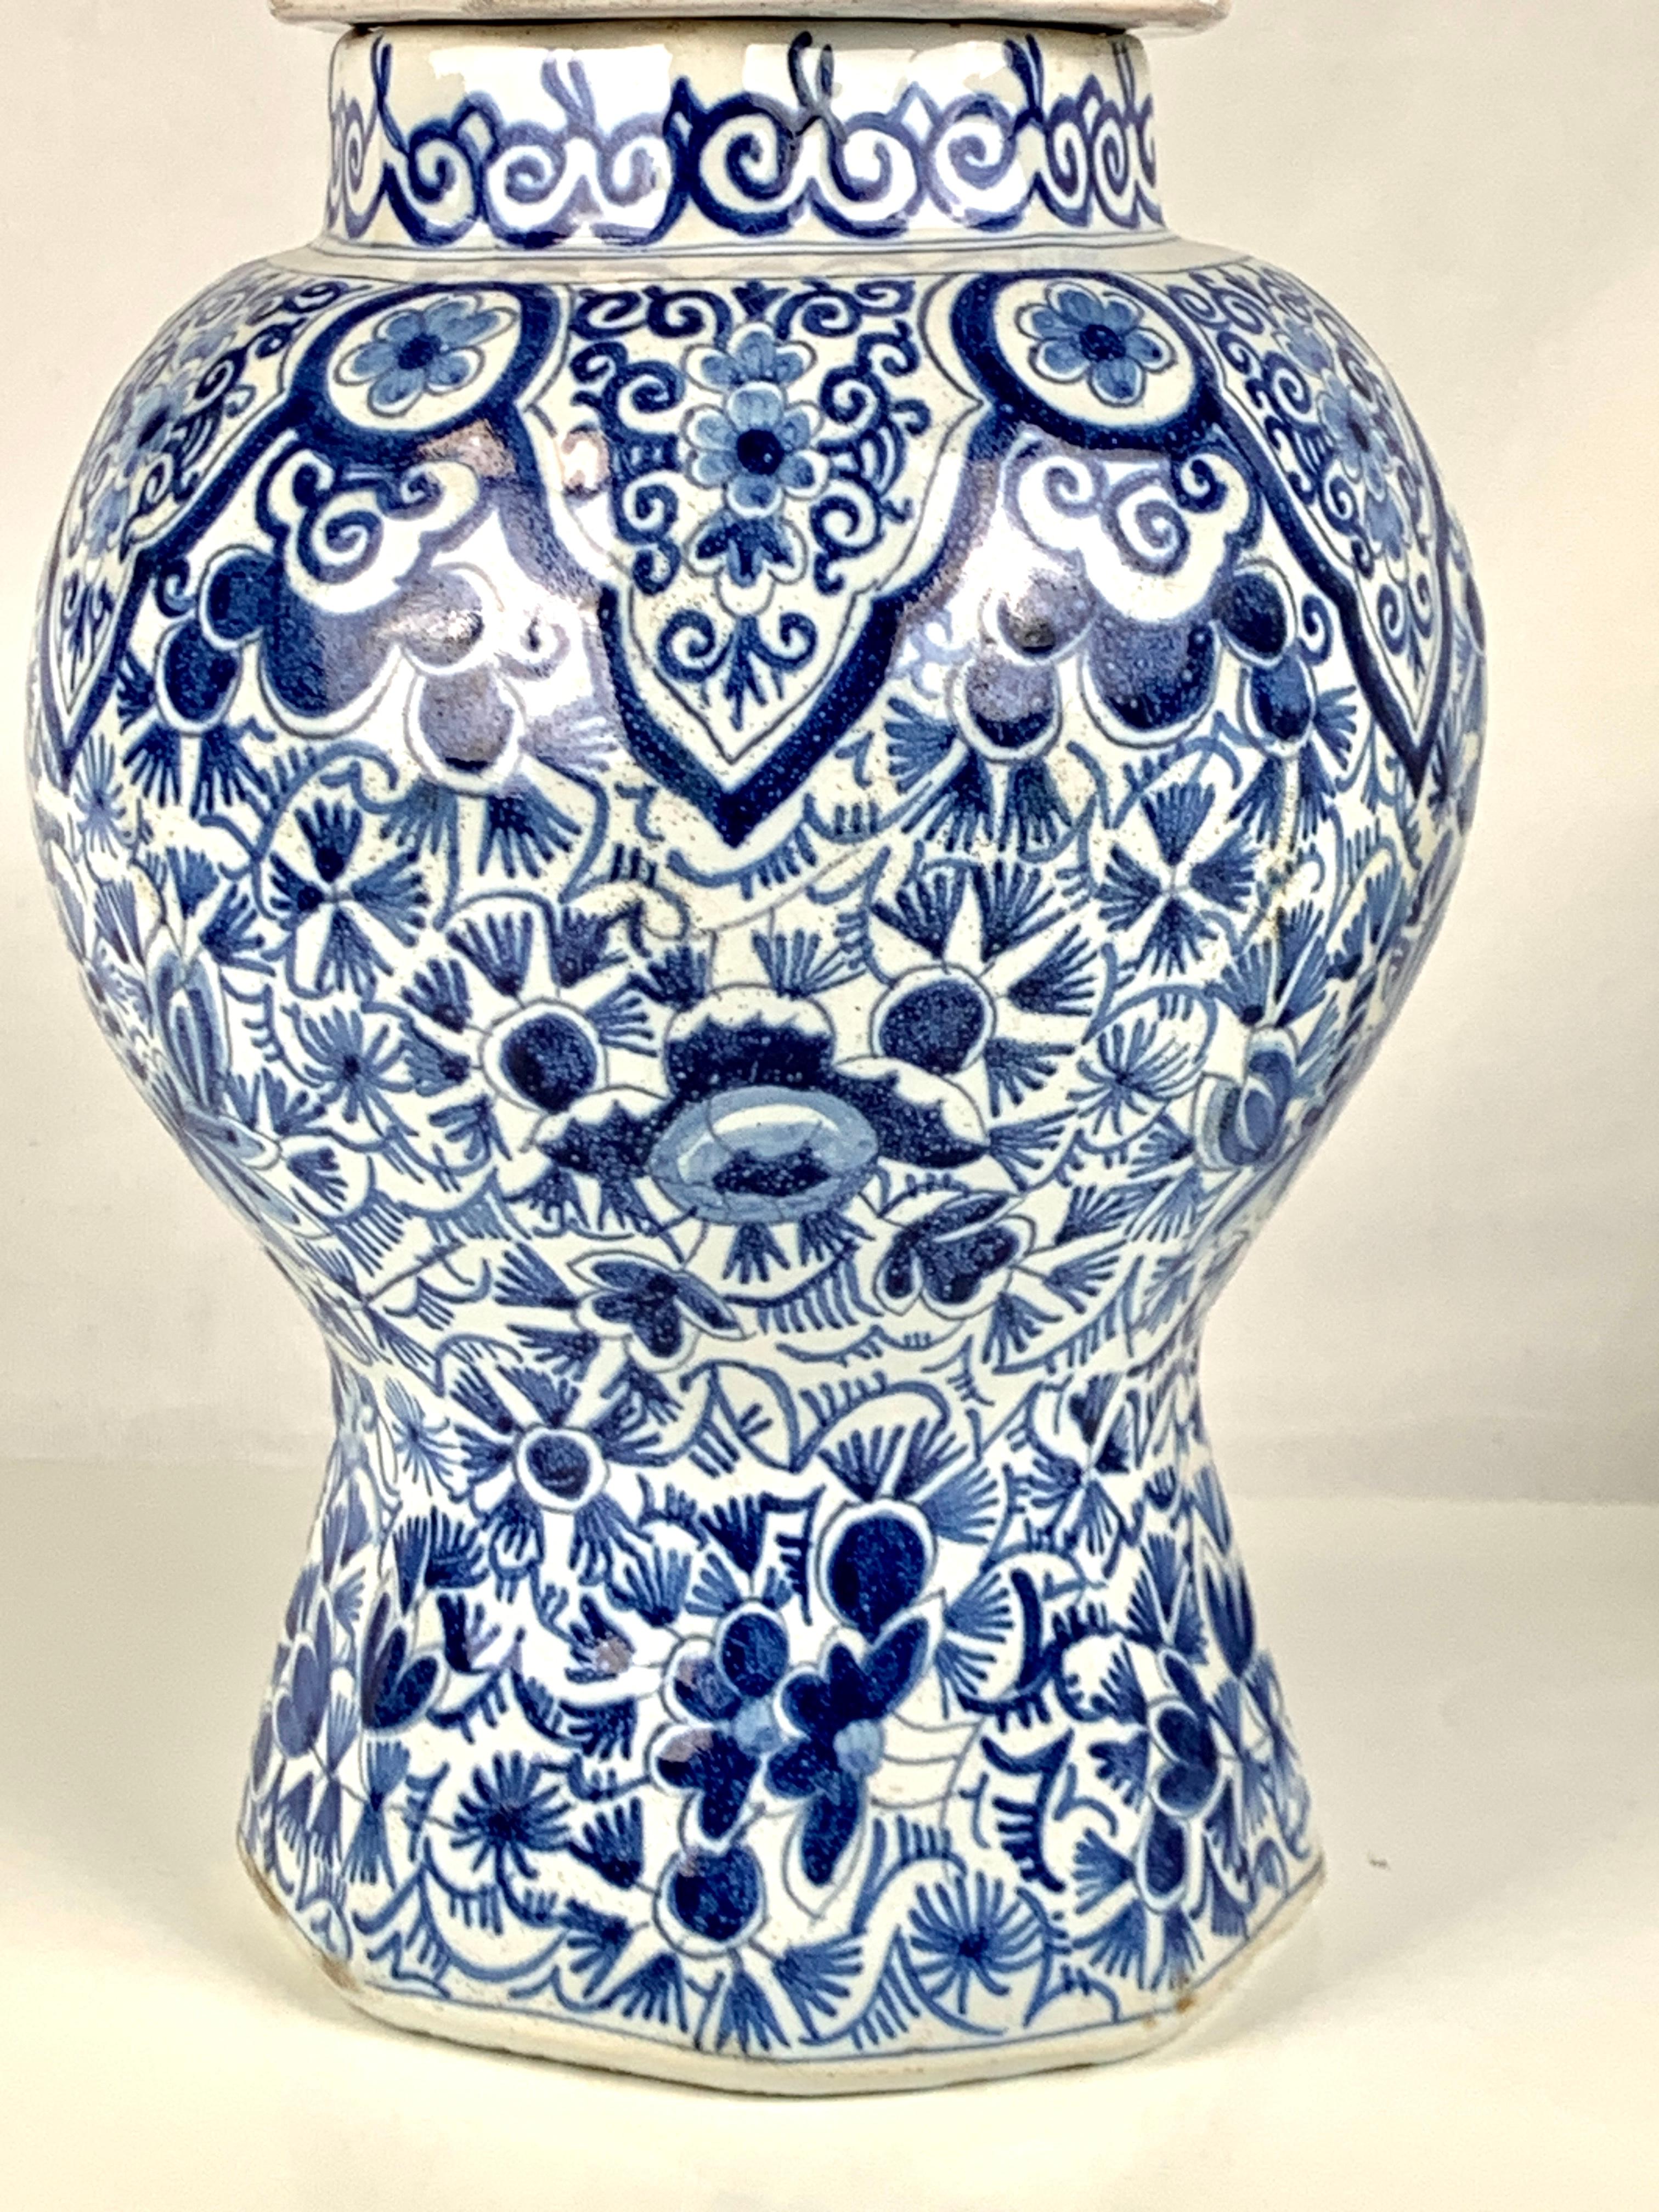 This hand-painted jar and cover from circa 1790 boasts beautiful Dutch Delft floral artwork. 
The intricate design features a stunning array of blooms and vines in deep and medium cobalt blue. 
The shoulders of the jar are adorned with lappets